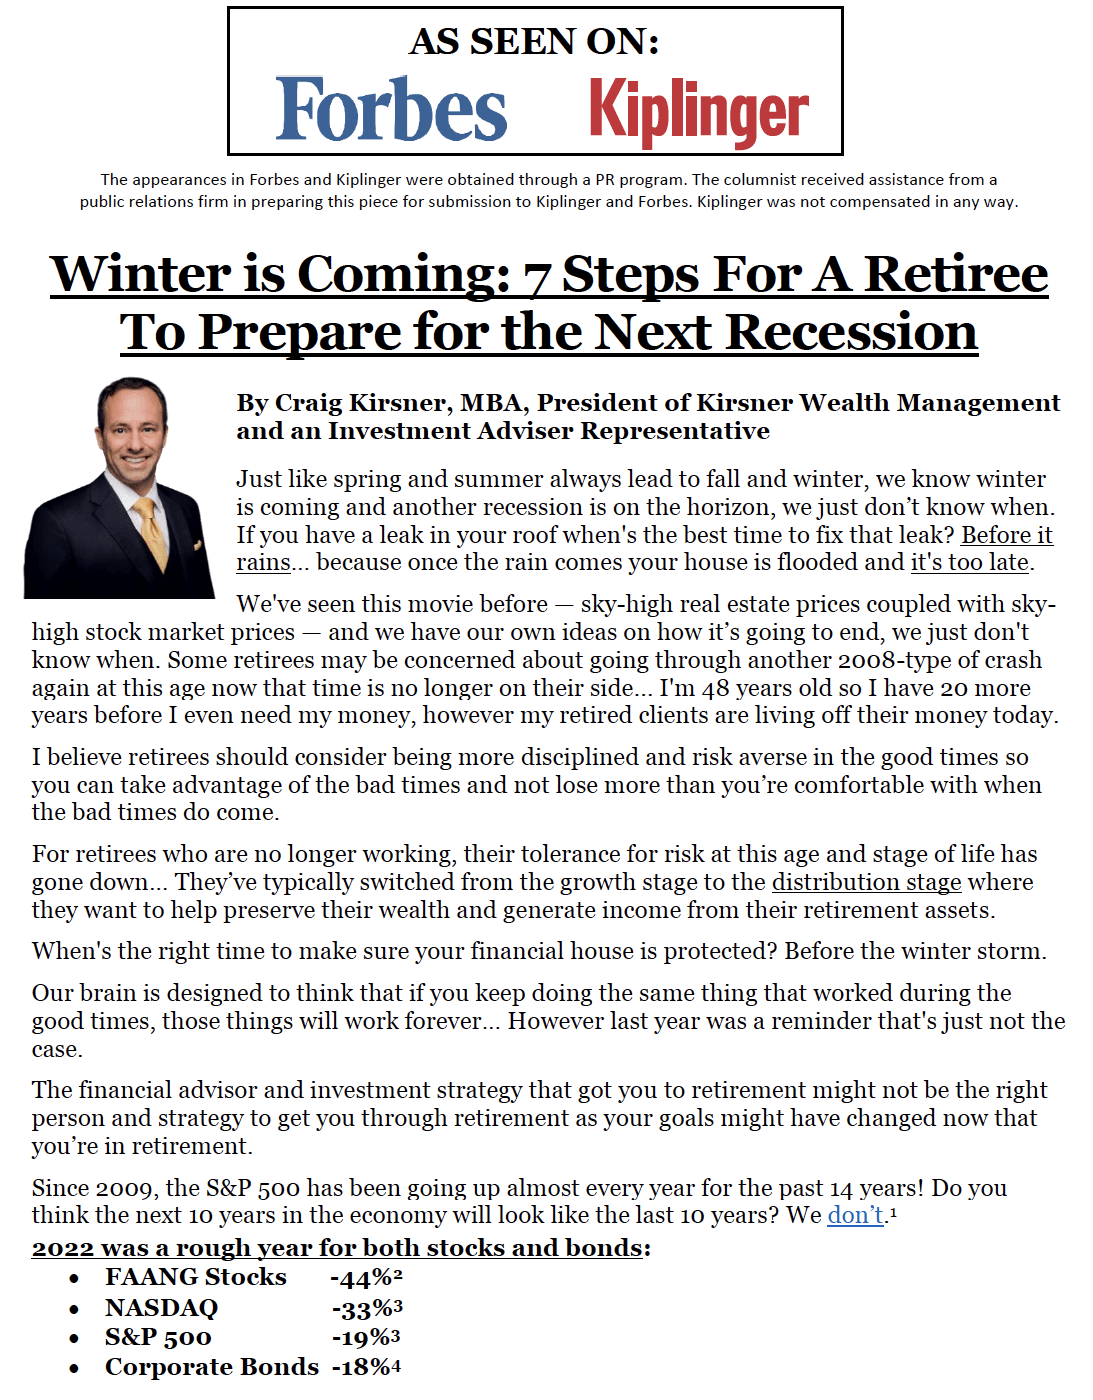 winter is coming article